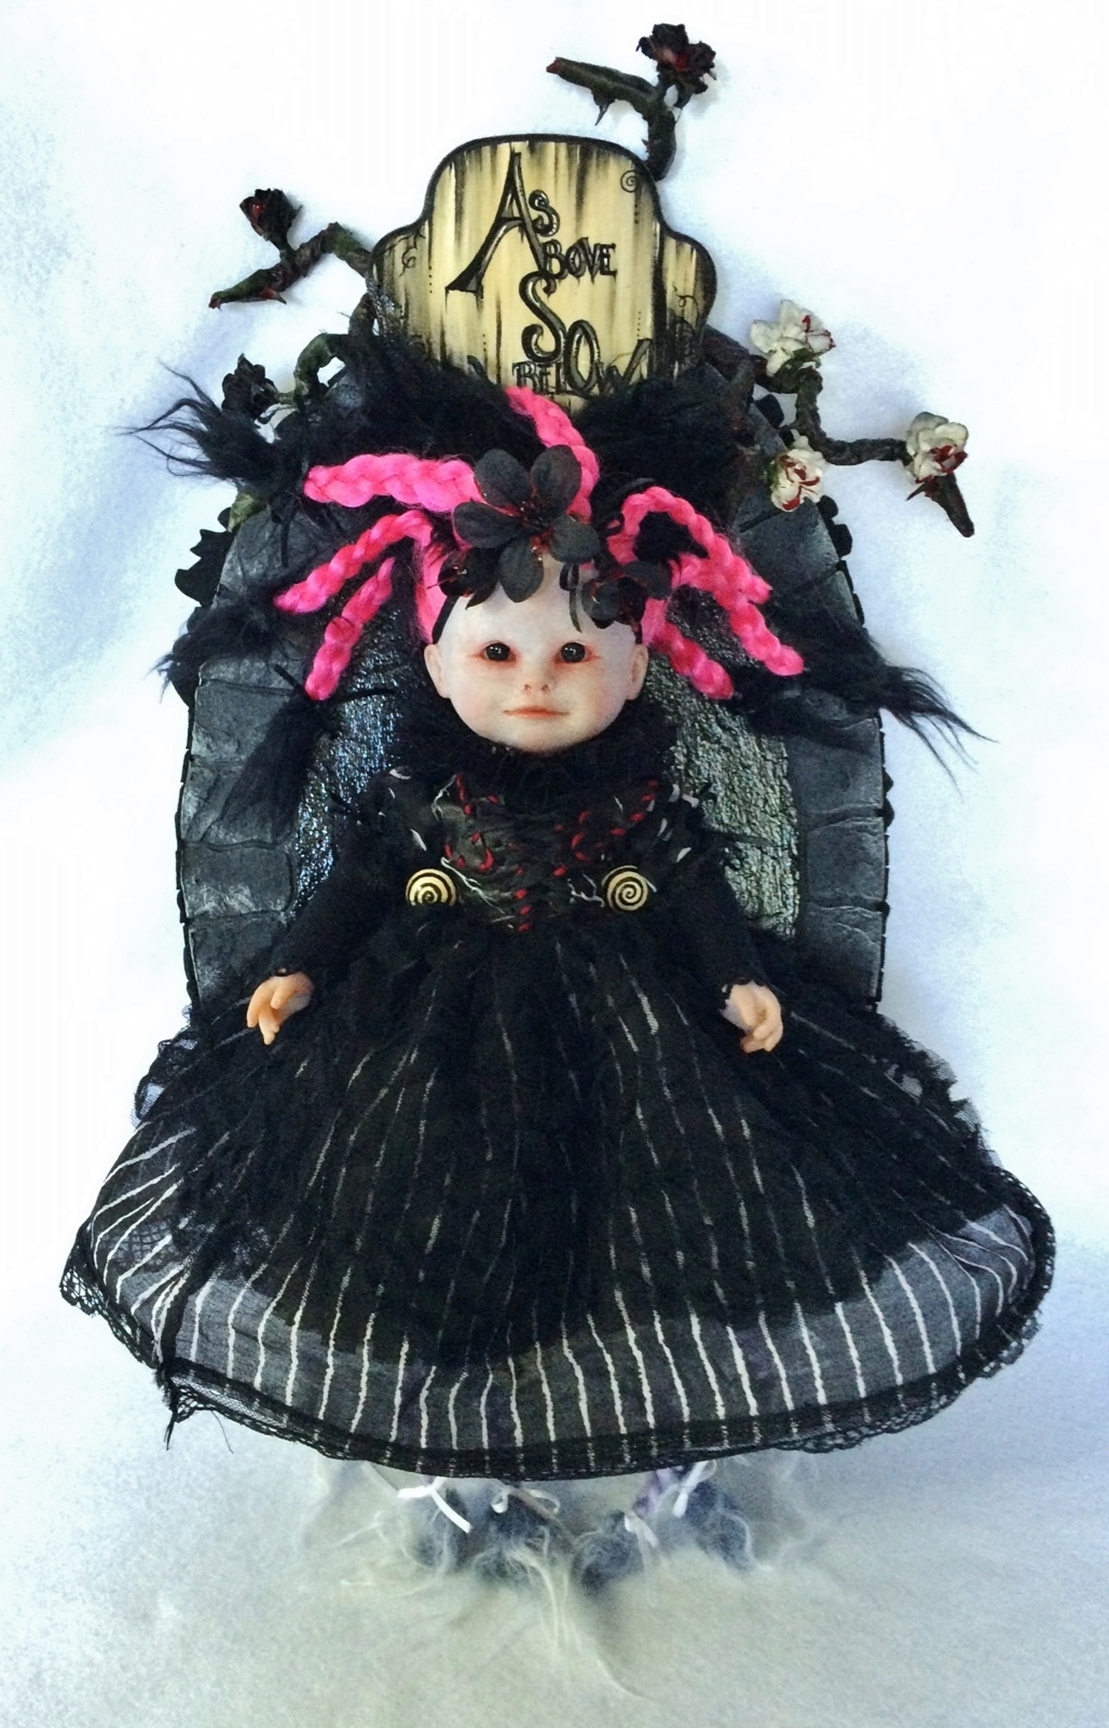 pale gothic artdoll with hot pink braids black eyes with no pupils and a black dress mounted on a carved hand-painted wooden plaque